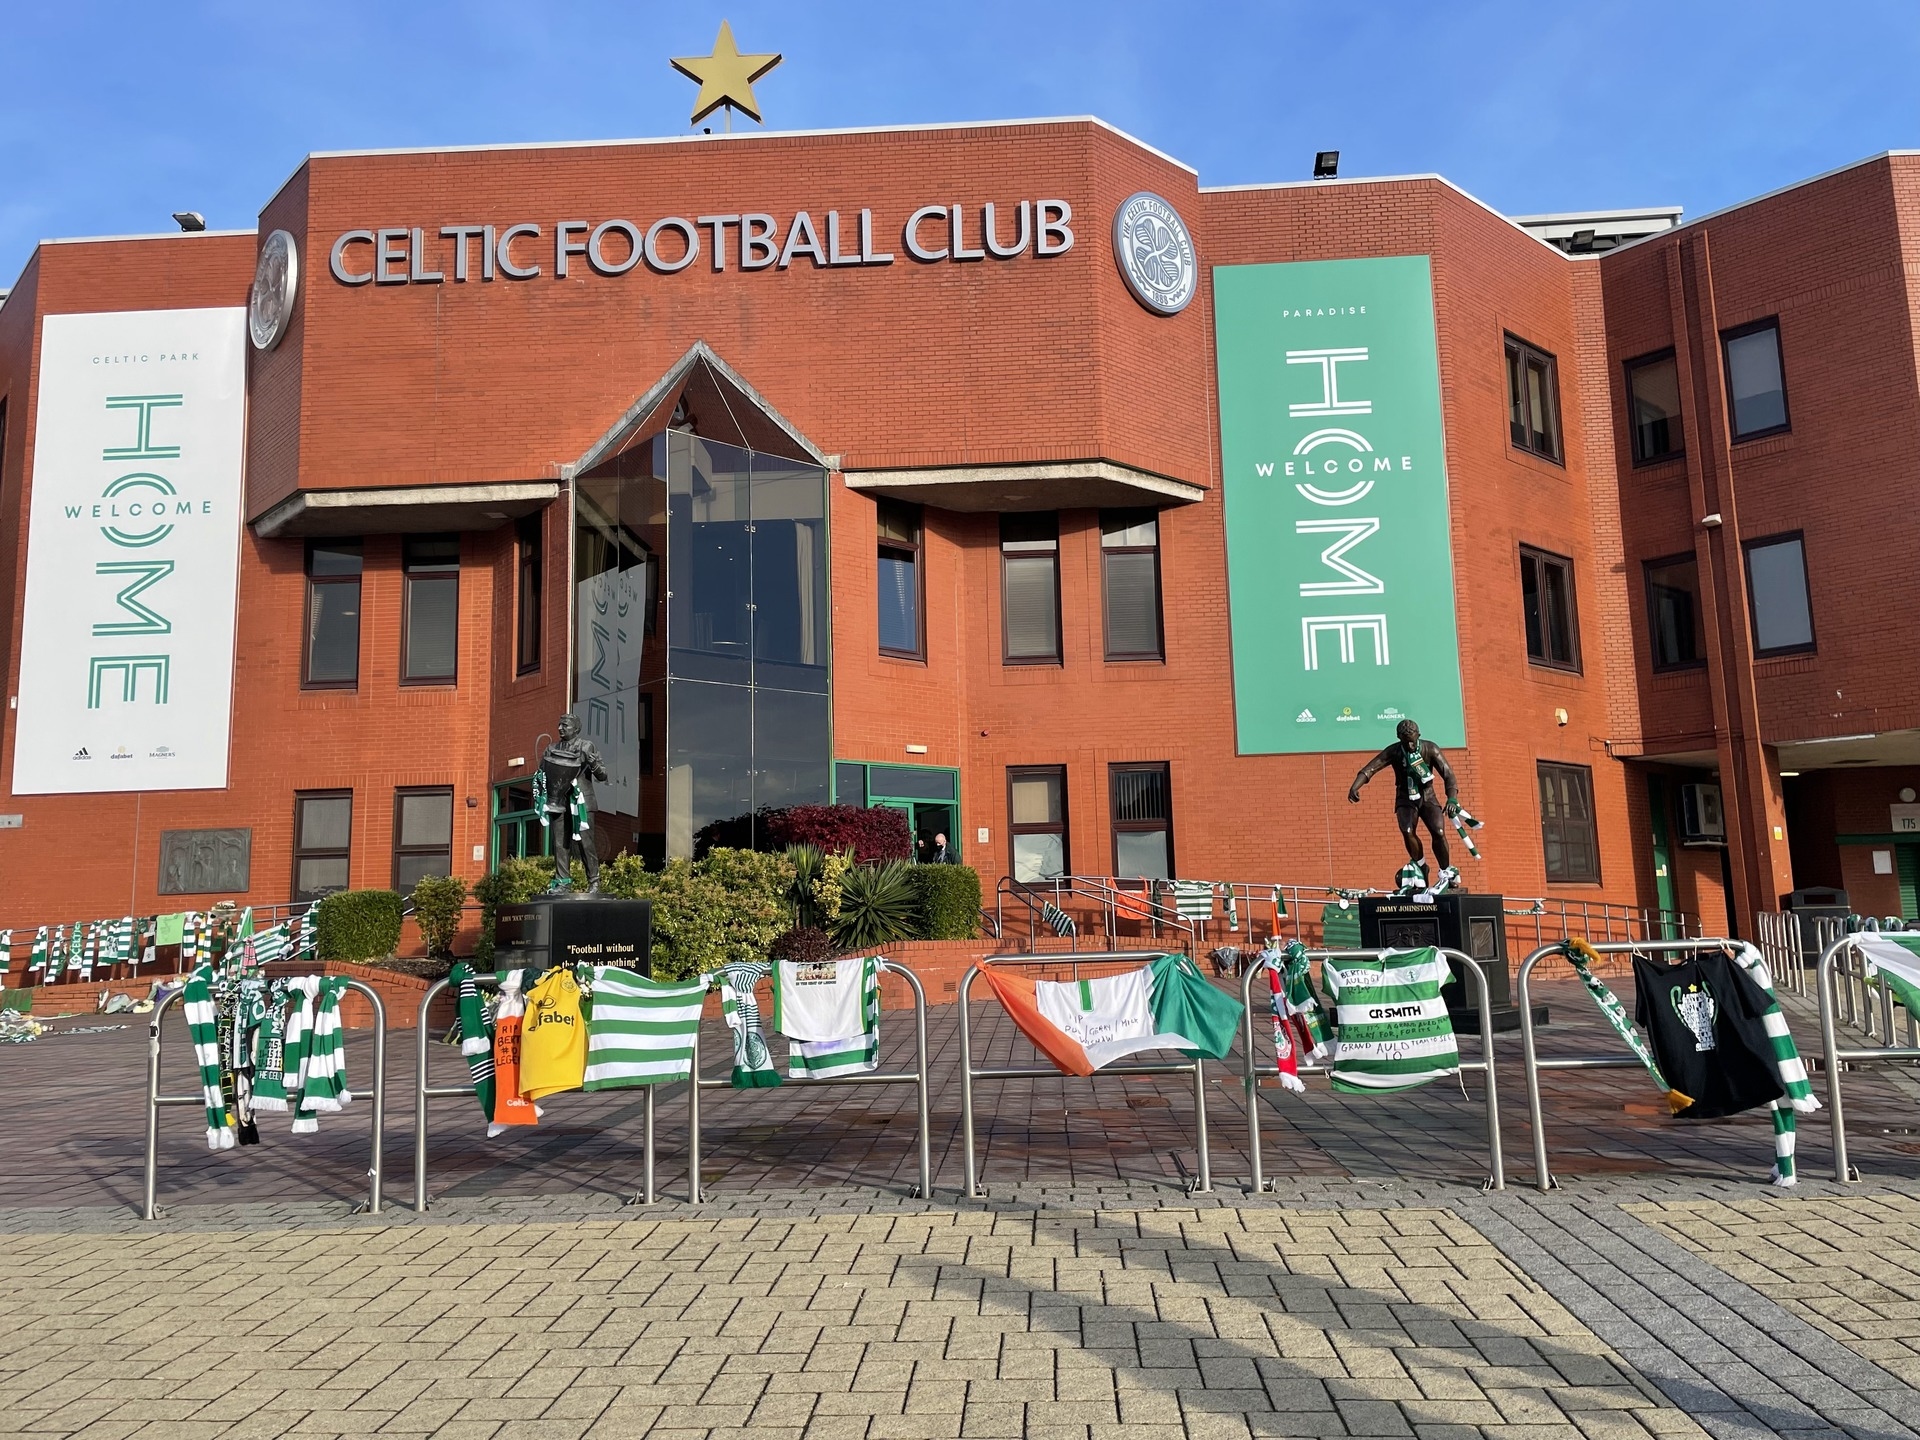 Tributes: Shirts and scarves at Celtic Park following death of Bertie Auld. 